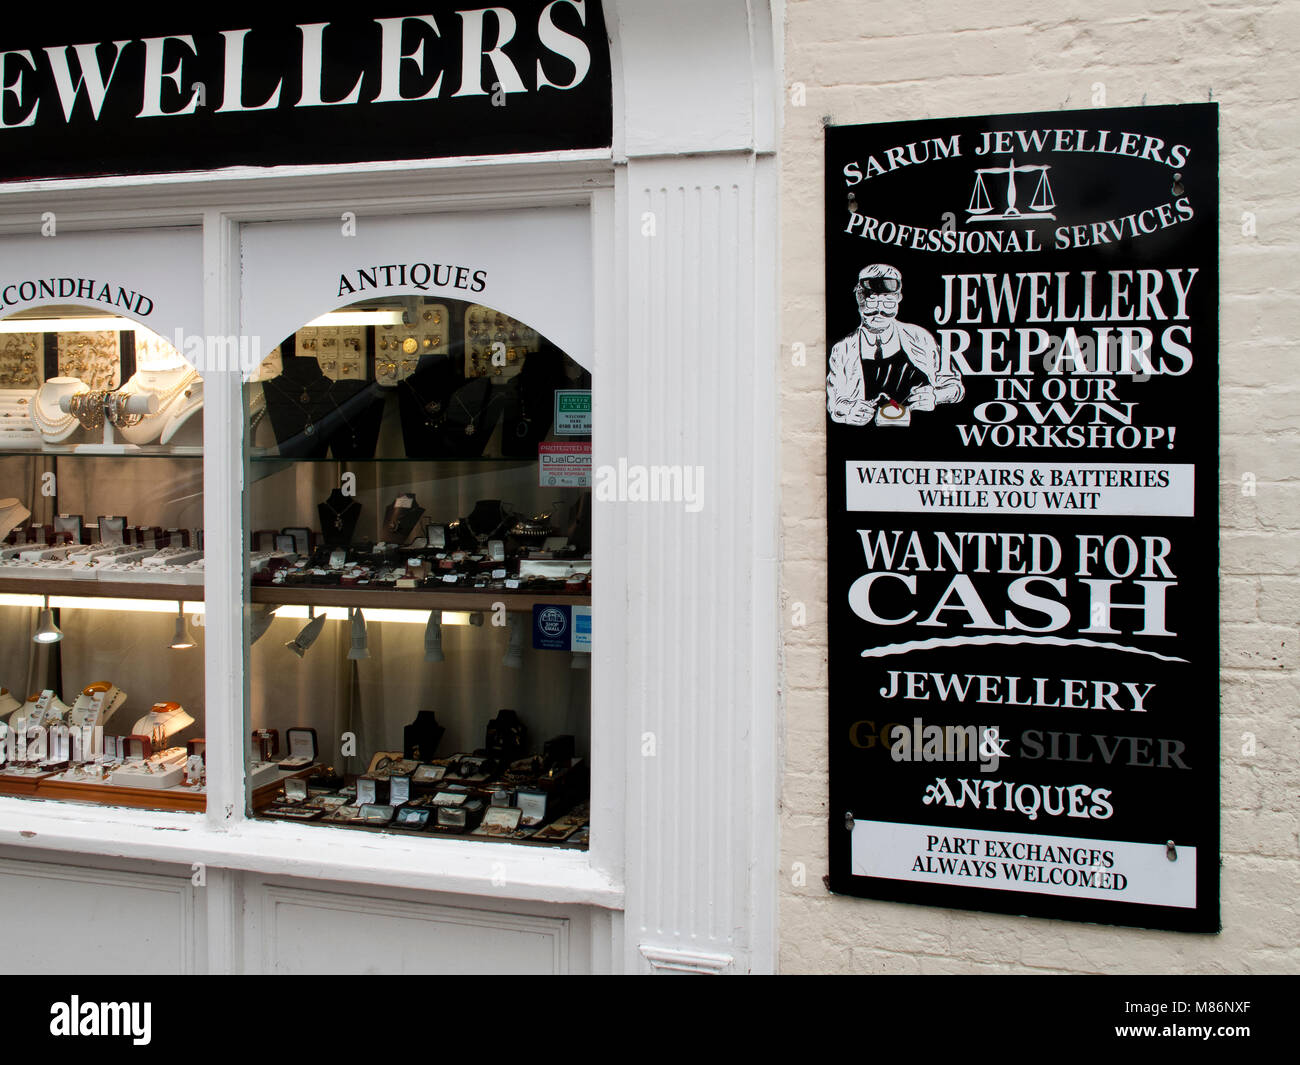 Sarum jewellers Professional Services, repairs in their own workshop advertising board and window display Stock Photo